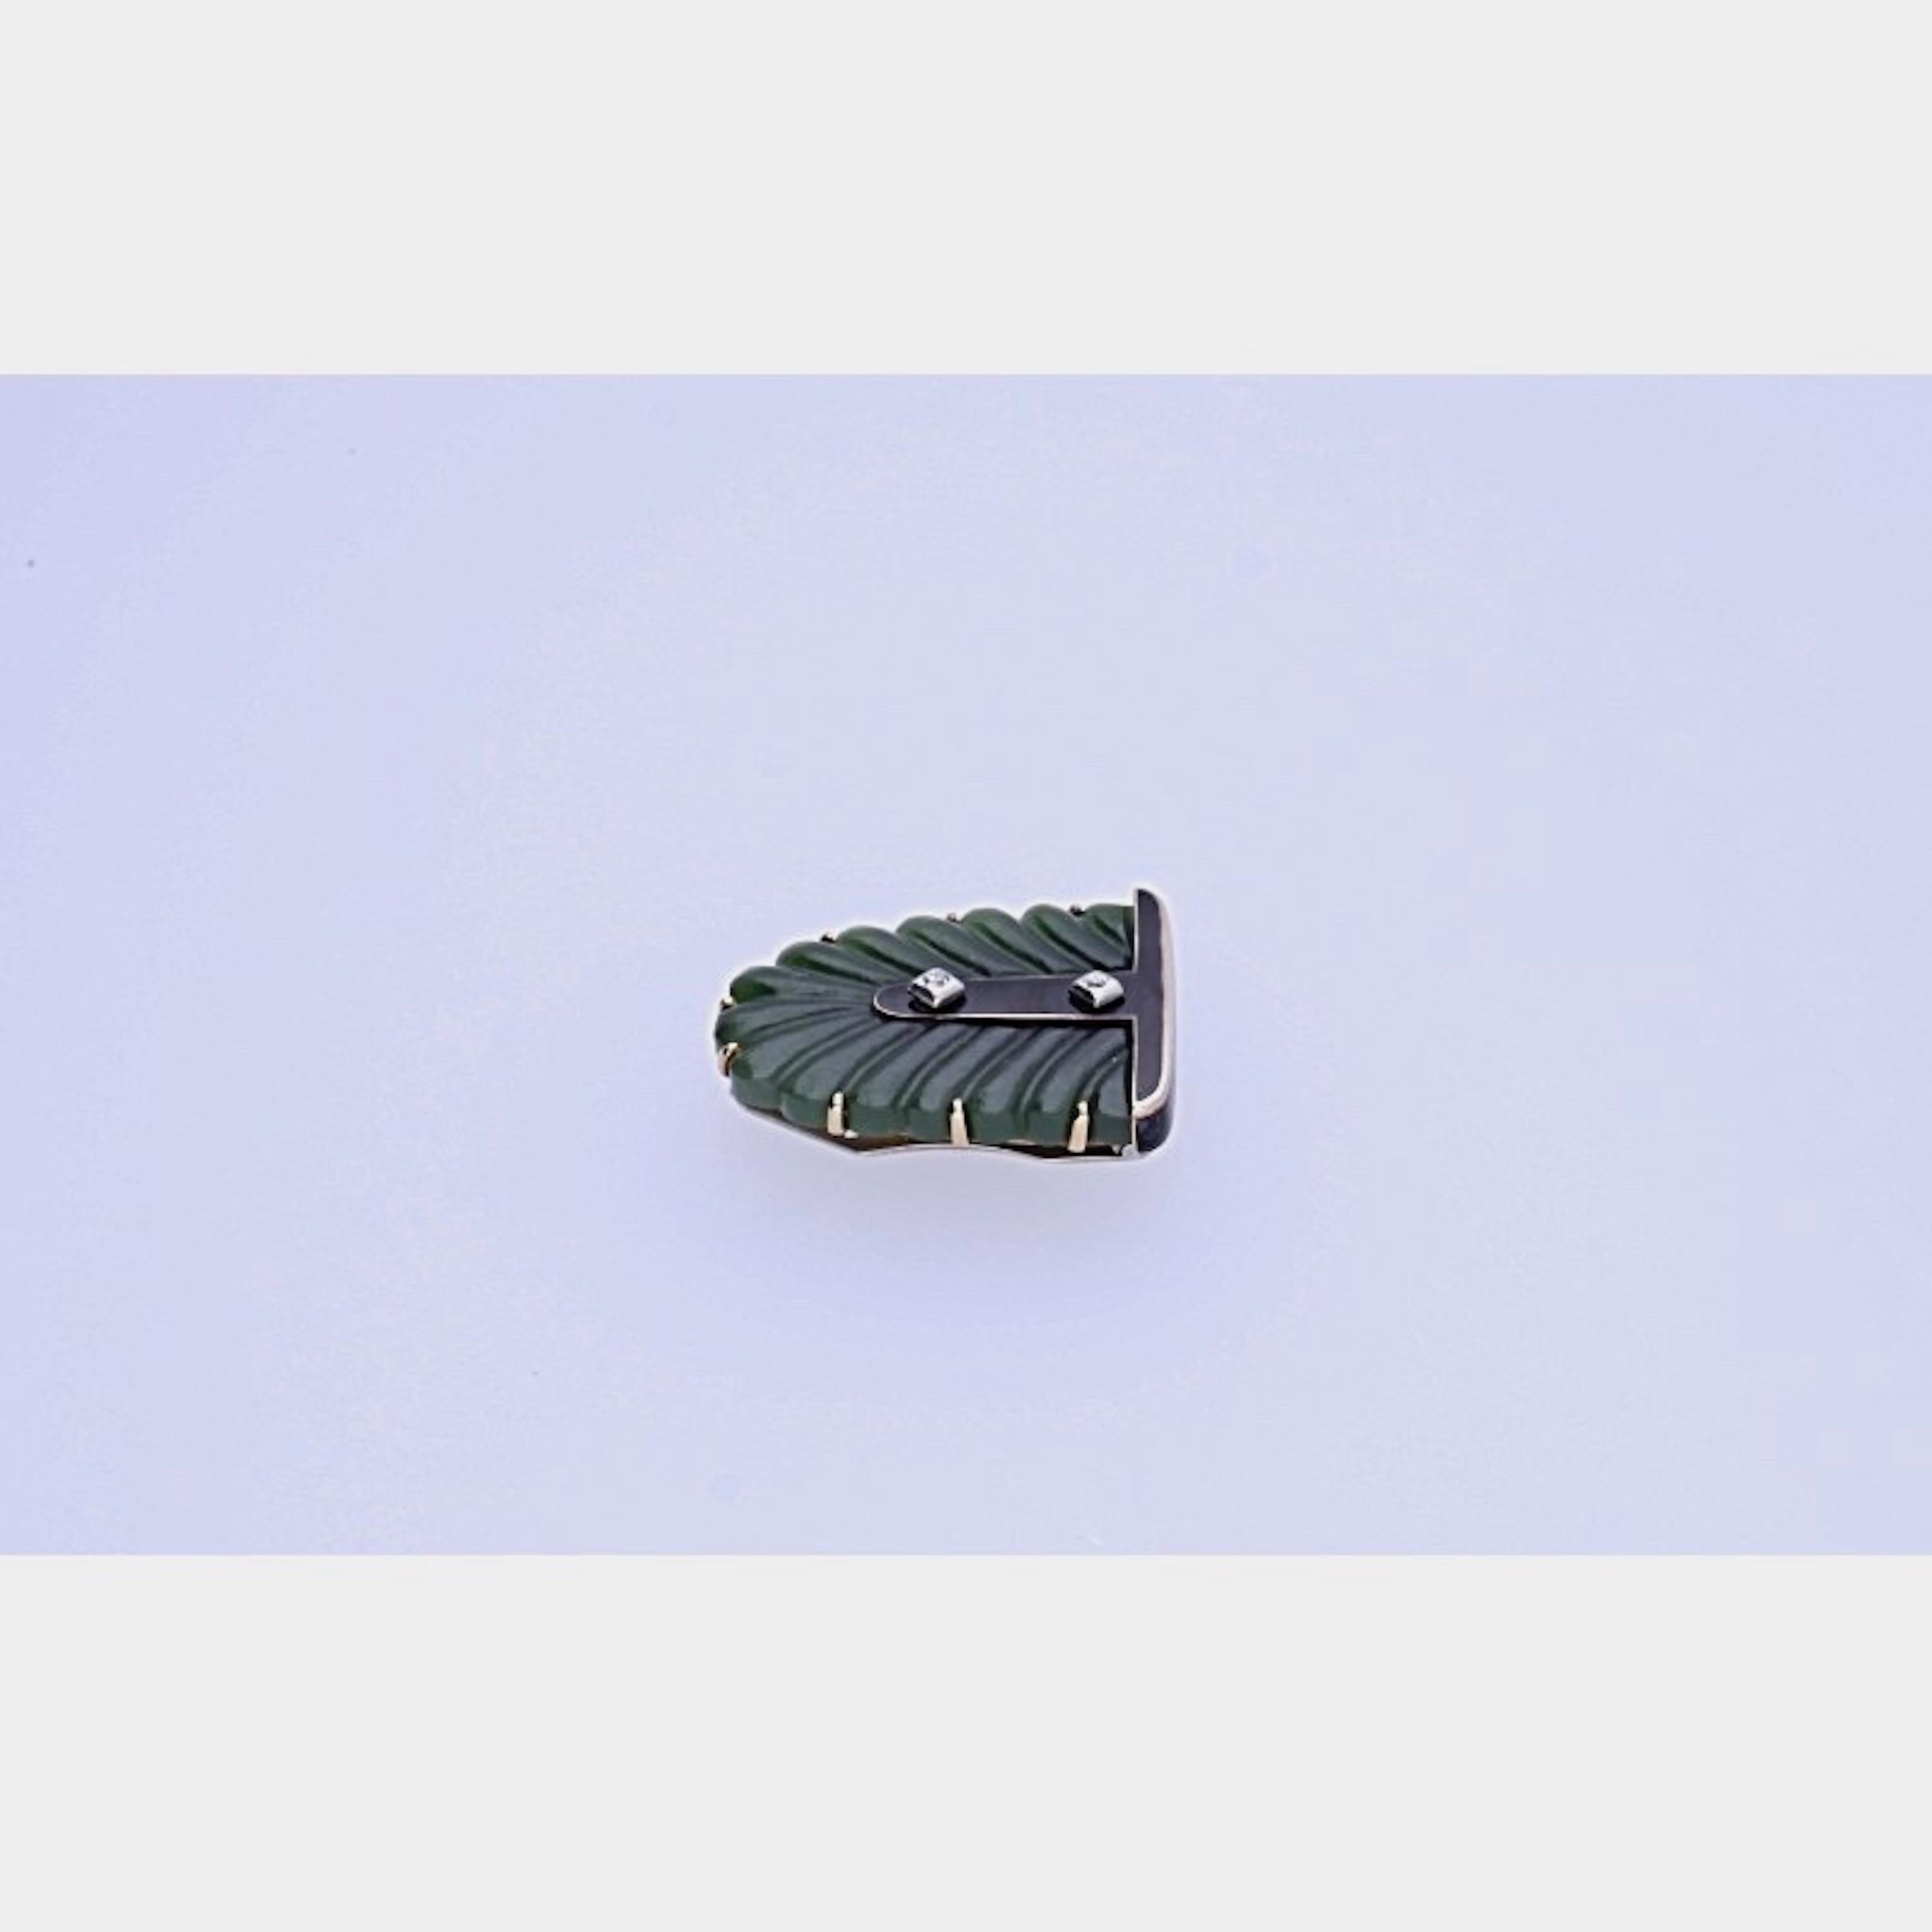 18 kt. yellow and white gold clip with 2 old-cut diamonds, carved nephrite and black enamel.
This brooch has the original box and is signed by Cartier London.
Circa 1940.

